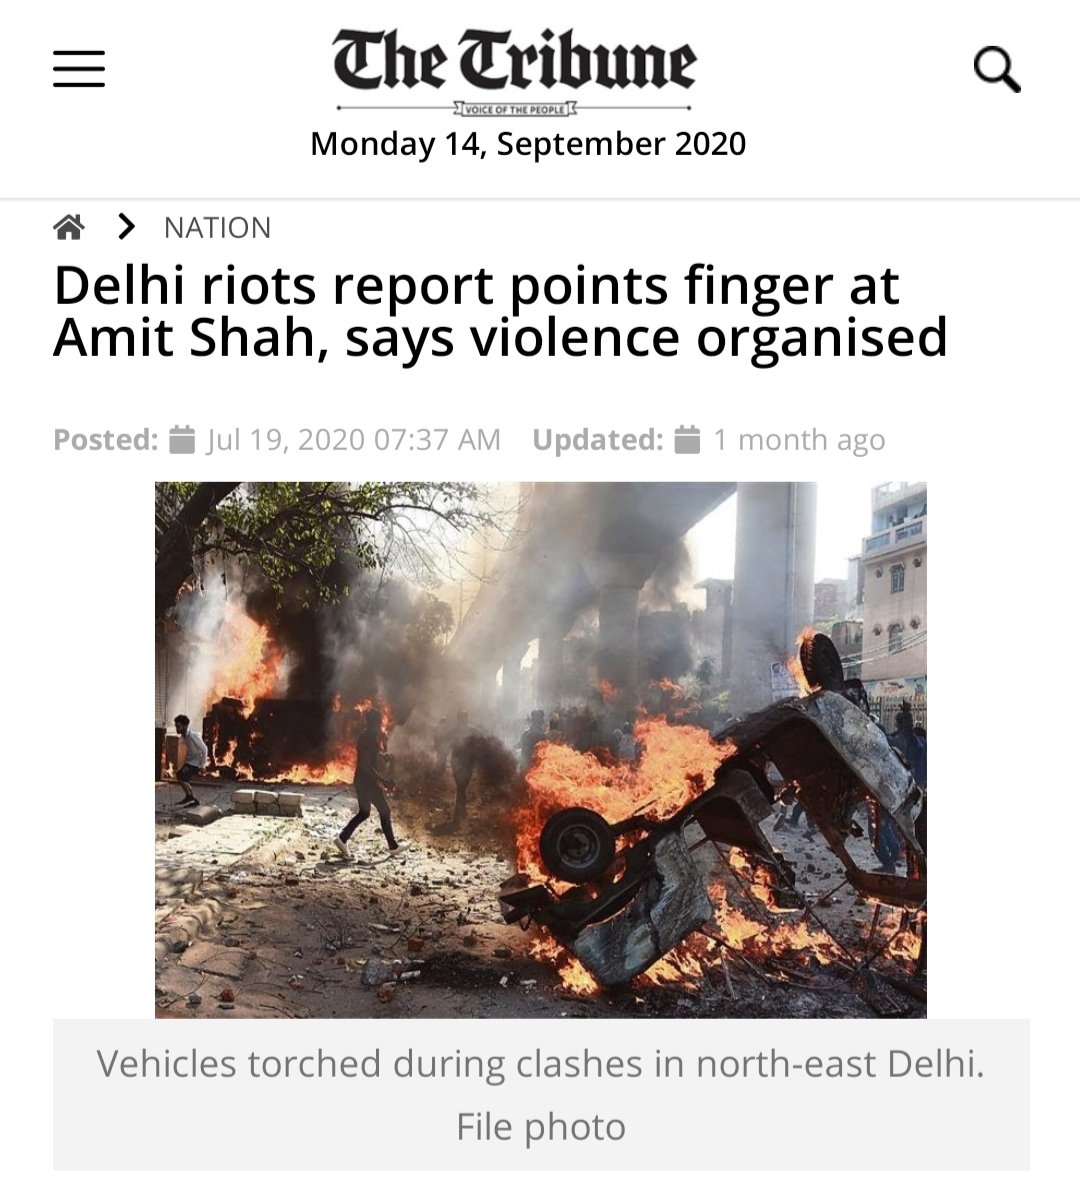 Umar Khalid's role in Delhi Riots is well documented. A thread exposing him and what role he played during the violence 